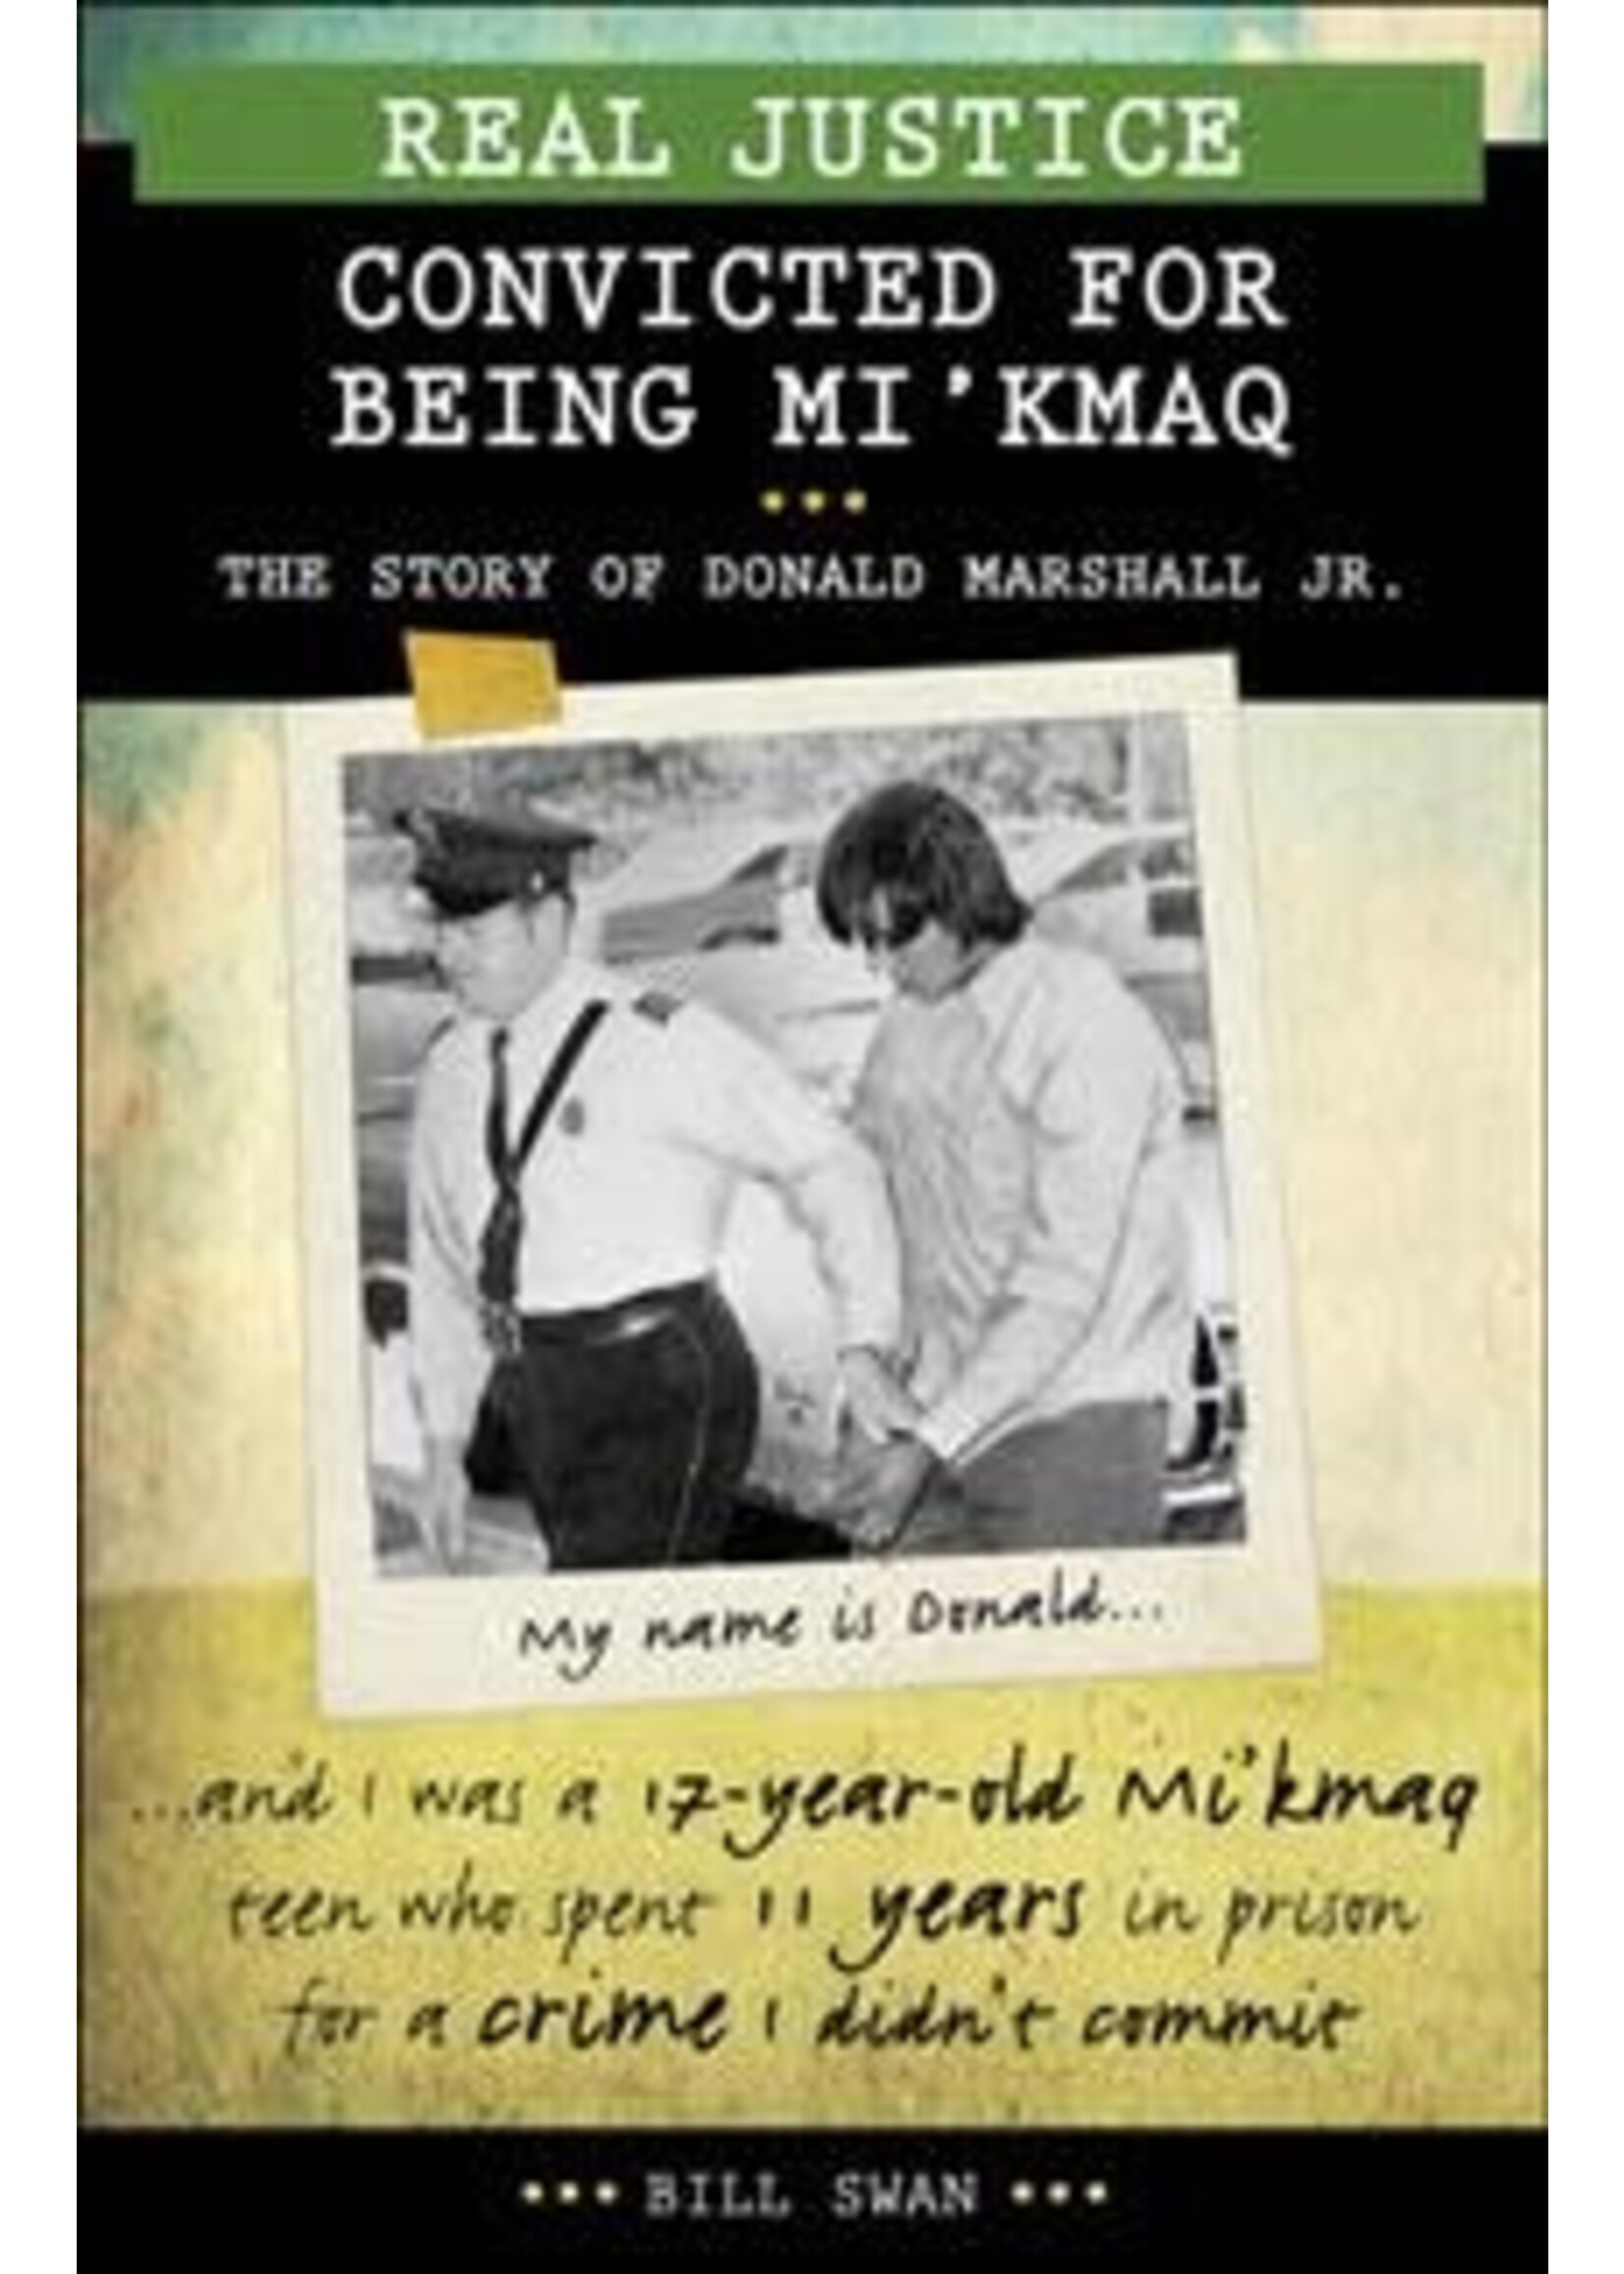 Real Justice: Convicted for Being Mi'kmaq The story of Donald Marshall Jr. by Bill Swan